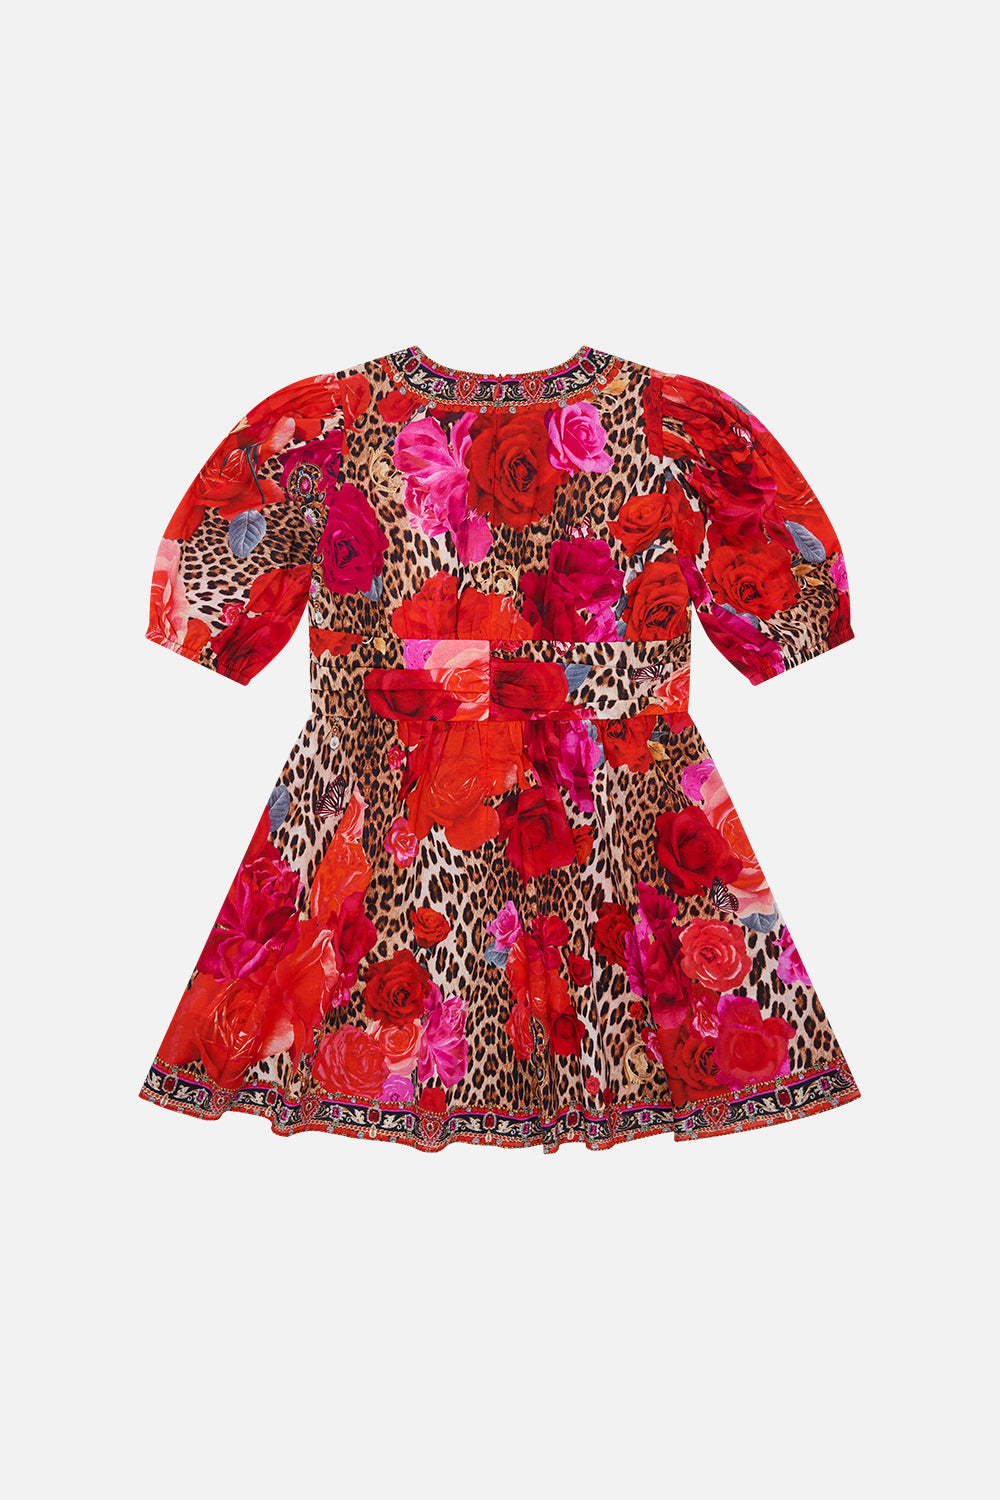 Milla by CAMILLA mini dress with oudd sleeve in Heart Like A Wildflower print 